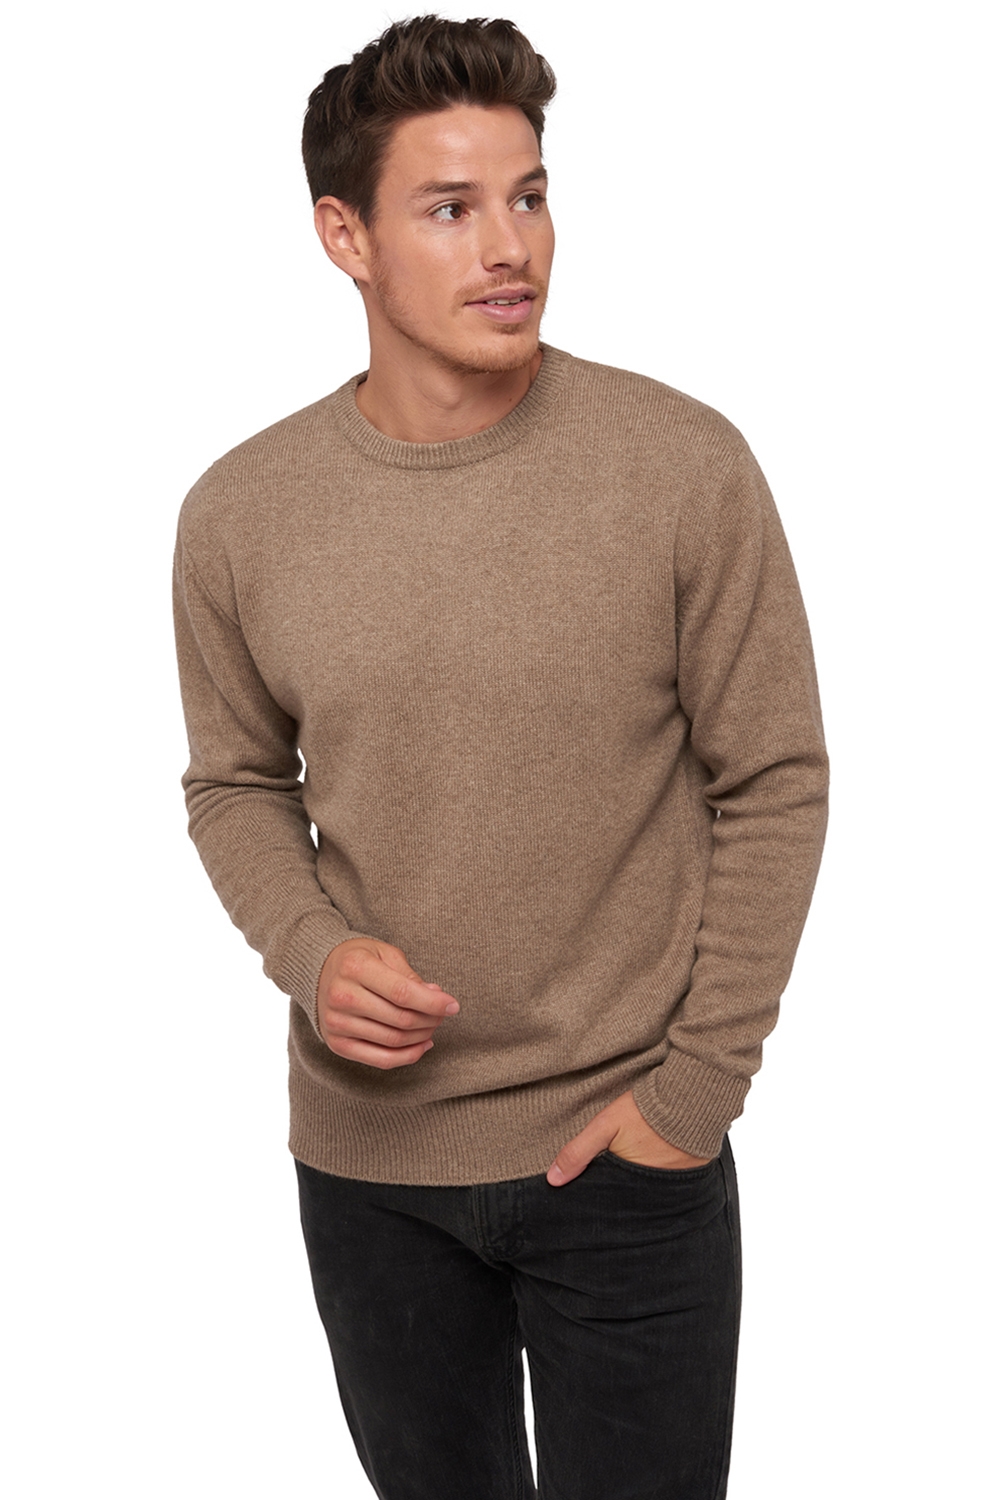 Cachemire Naturel pull homme cachemire couleur naturelle natural ness 4f natural brown 3xl